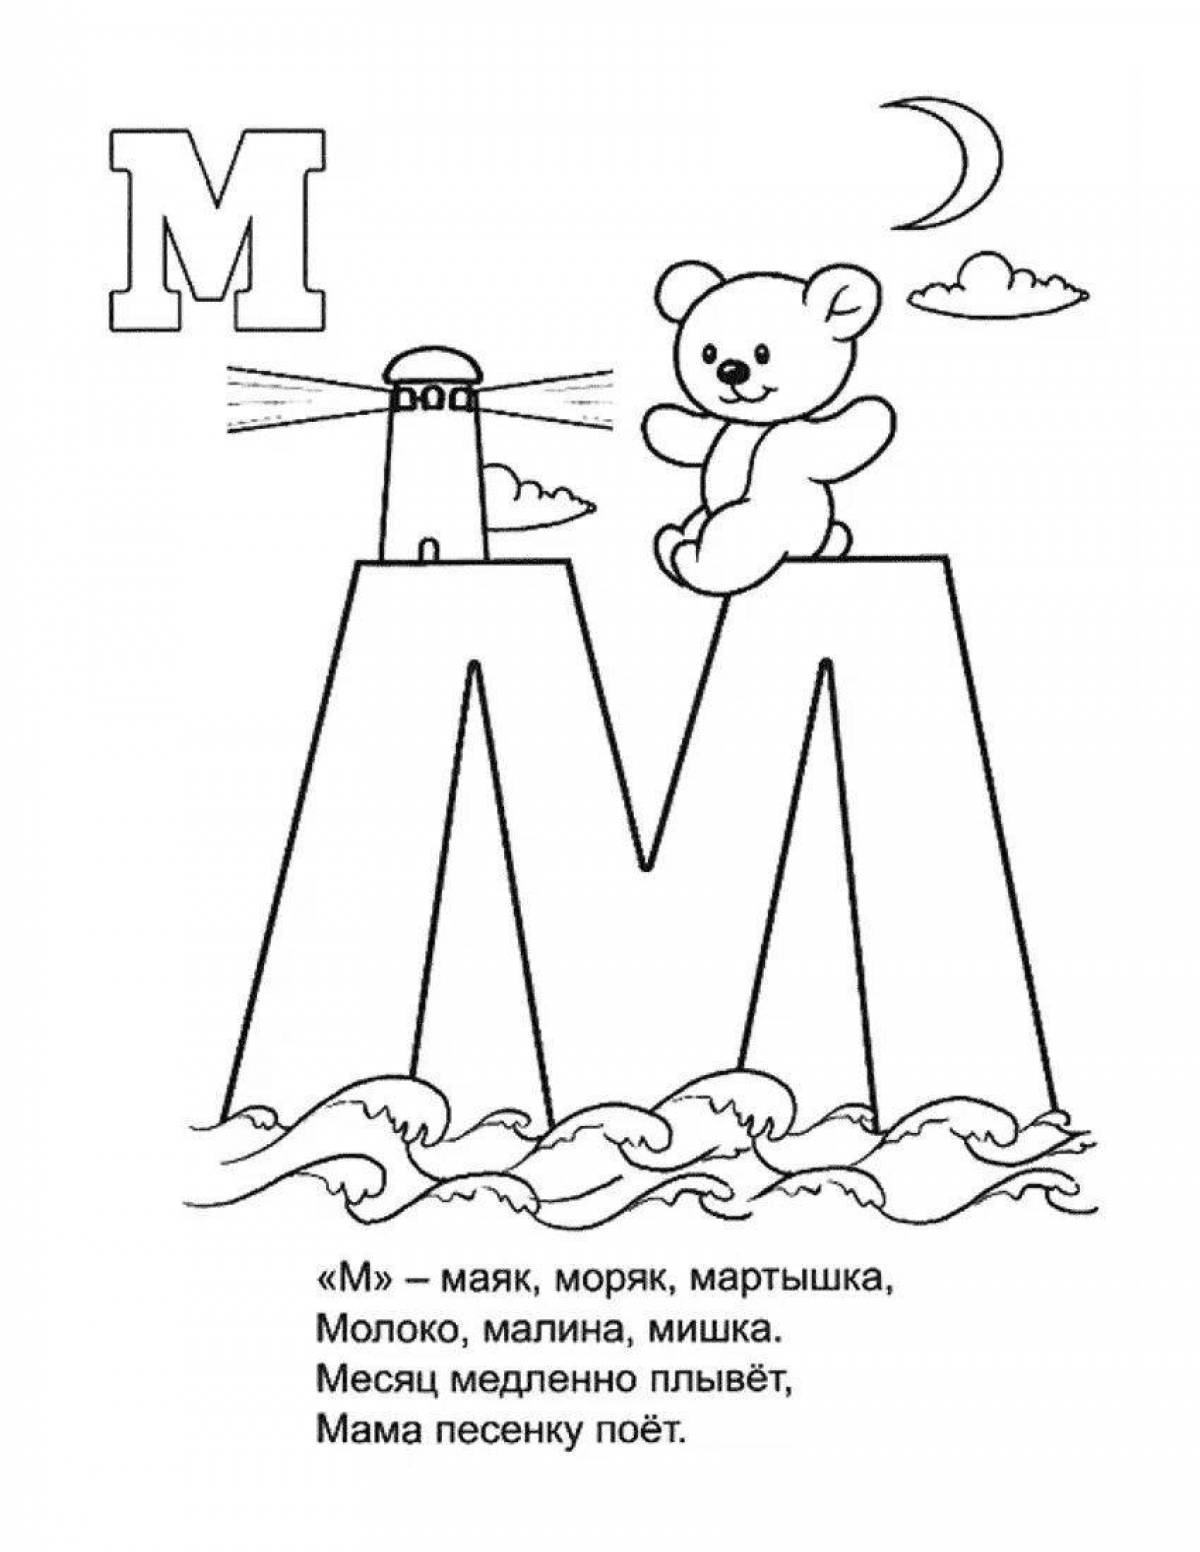 Crazy coloring page m